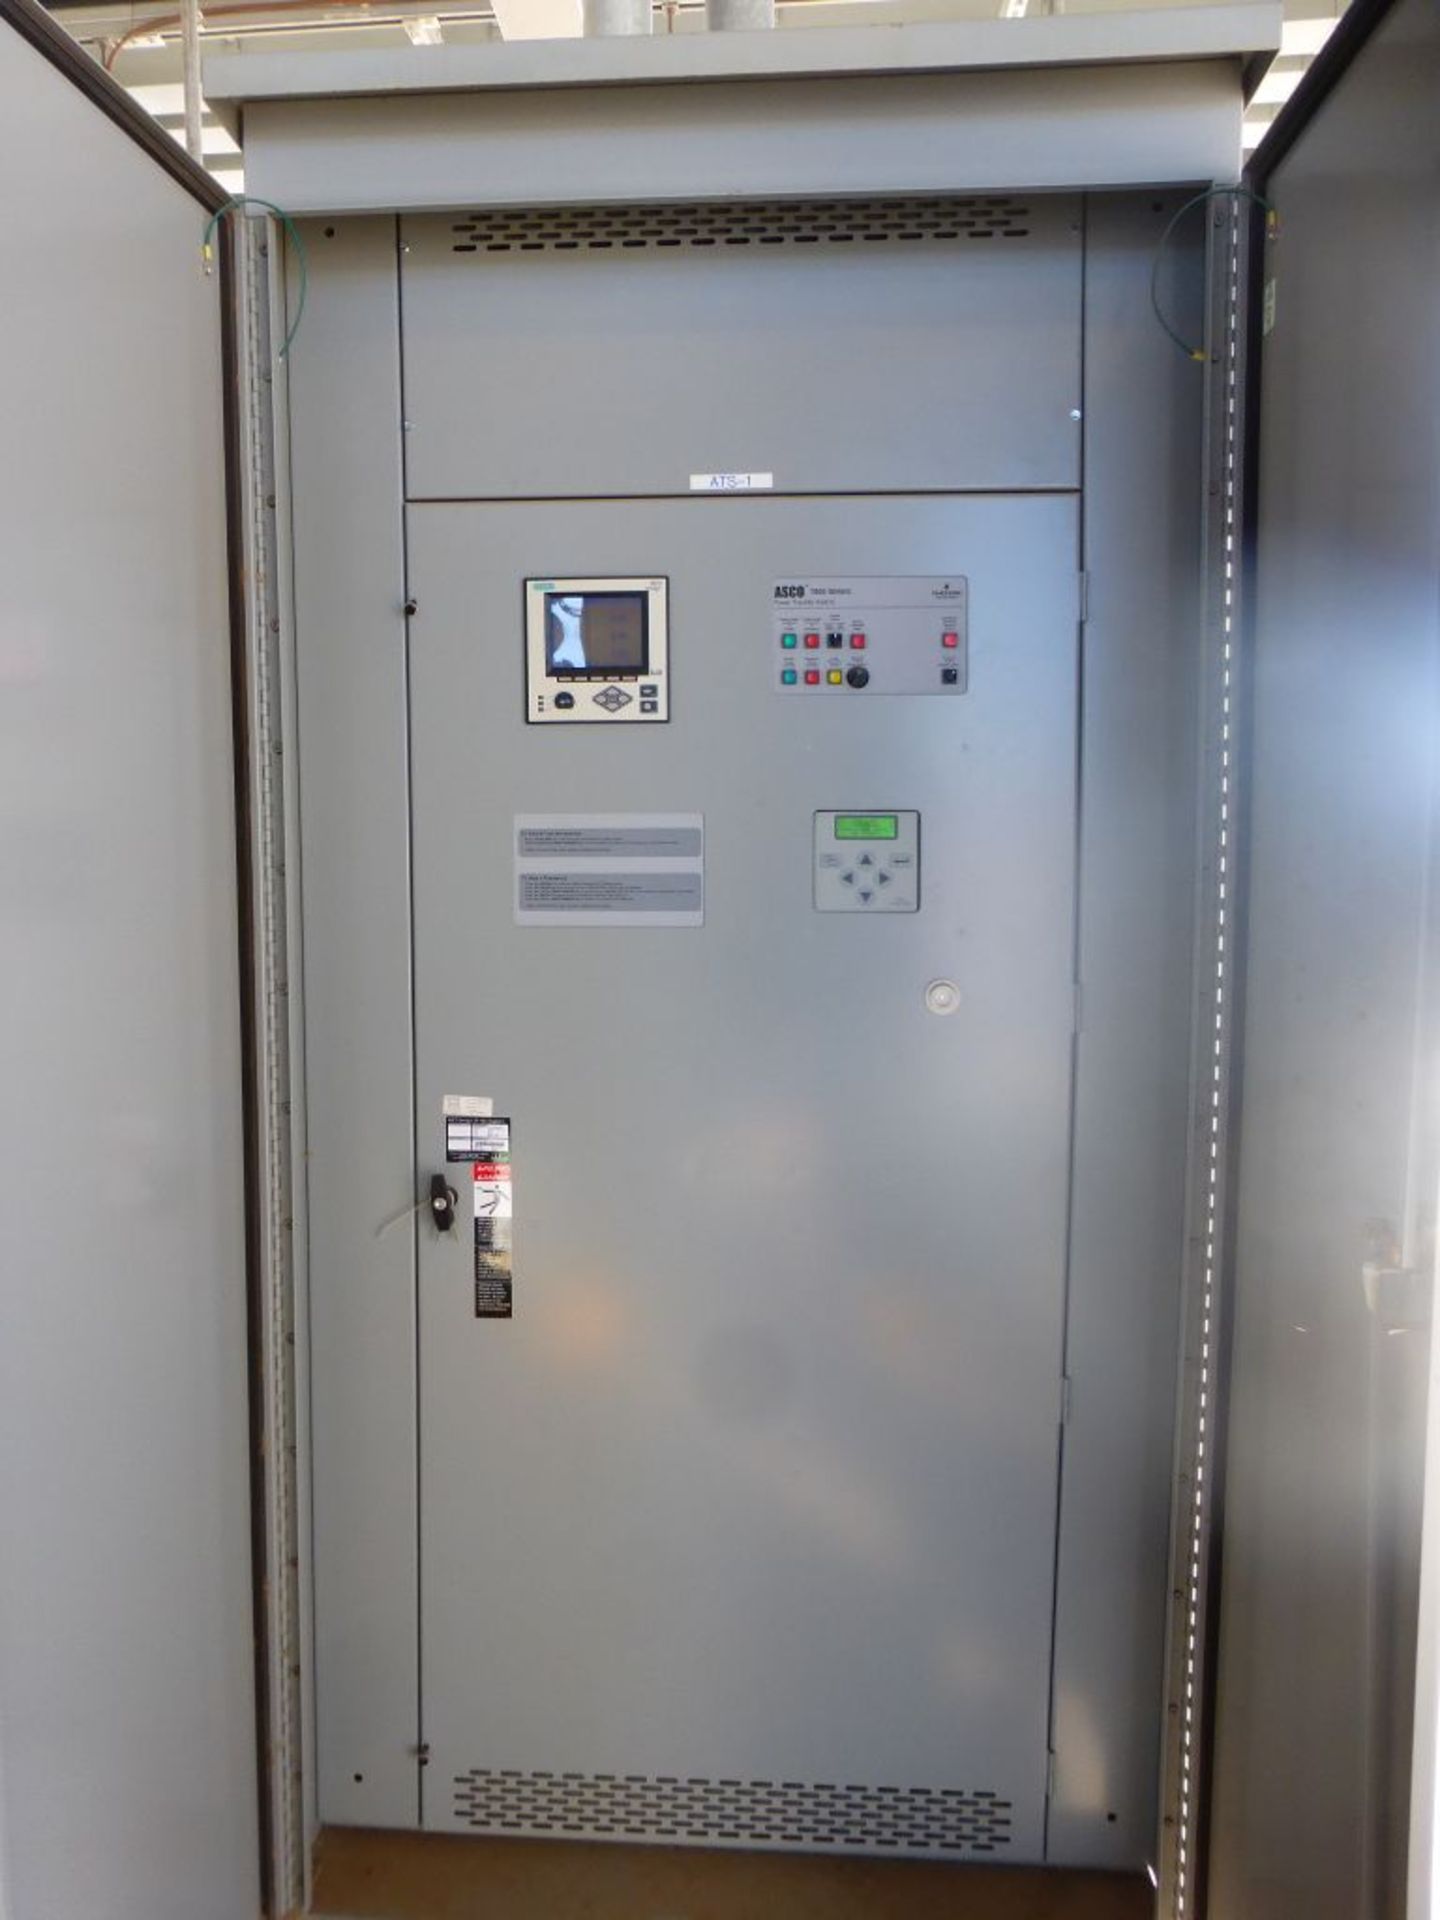 ASCO 7000 Series Power Transfer Switch | Lot Loading Fee: $50 | 800A; 480V; Tag: 233674 - Image 4 of 12